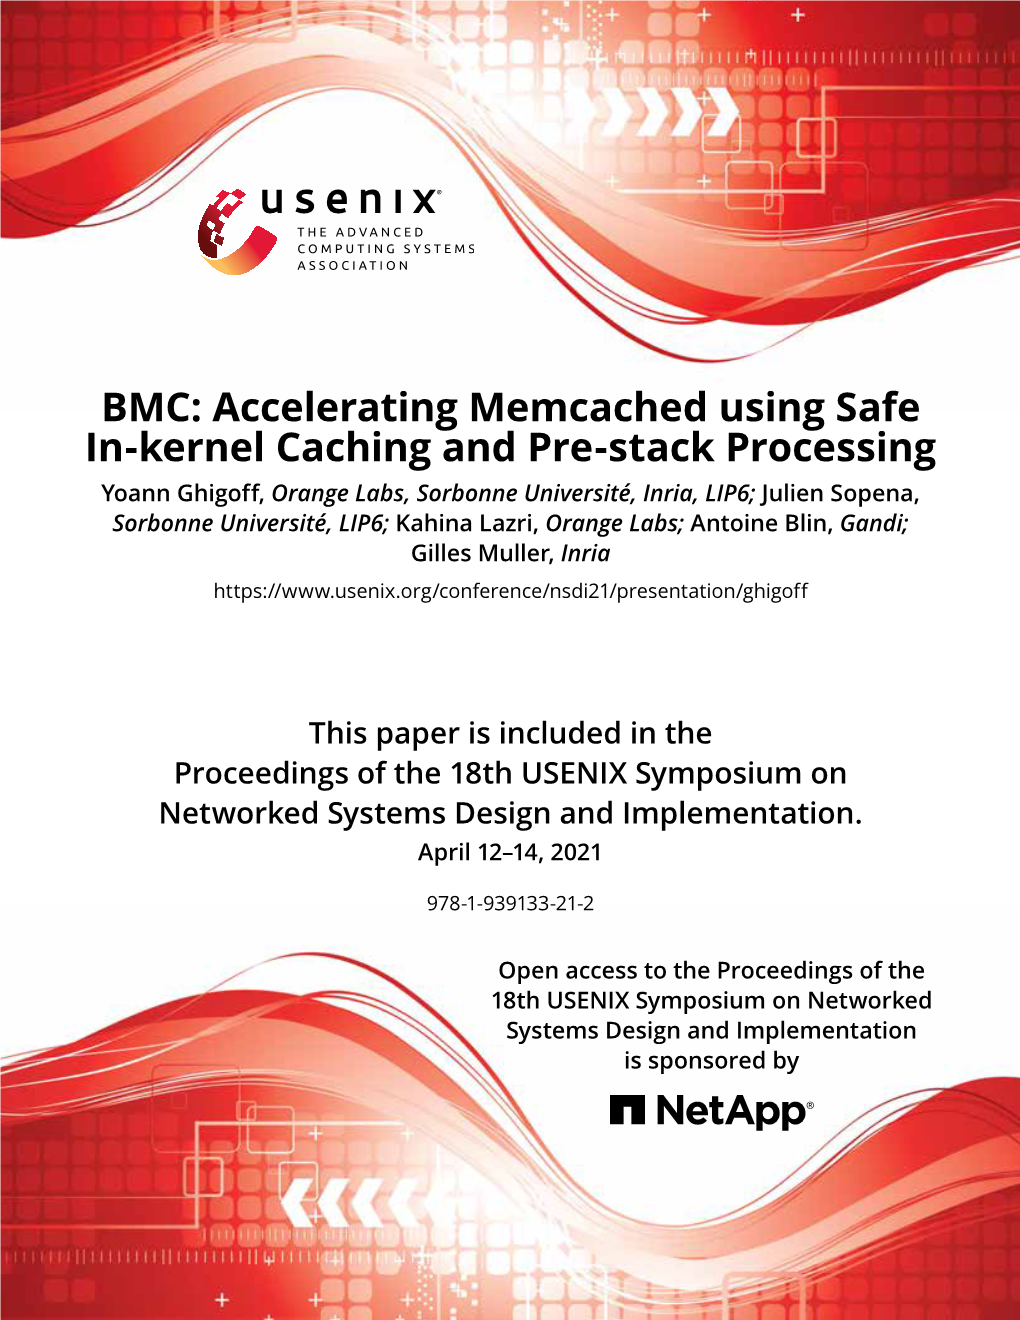 BMC: Accelerating Memcached Using Safe In-Kernel Caching and Pre